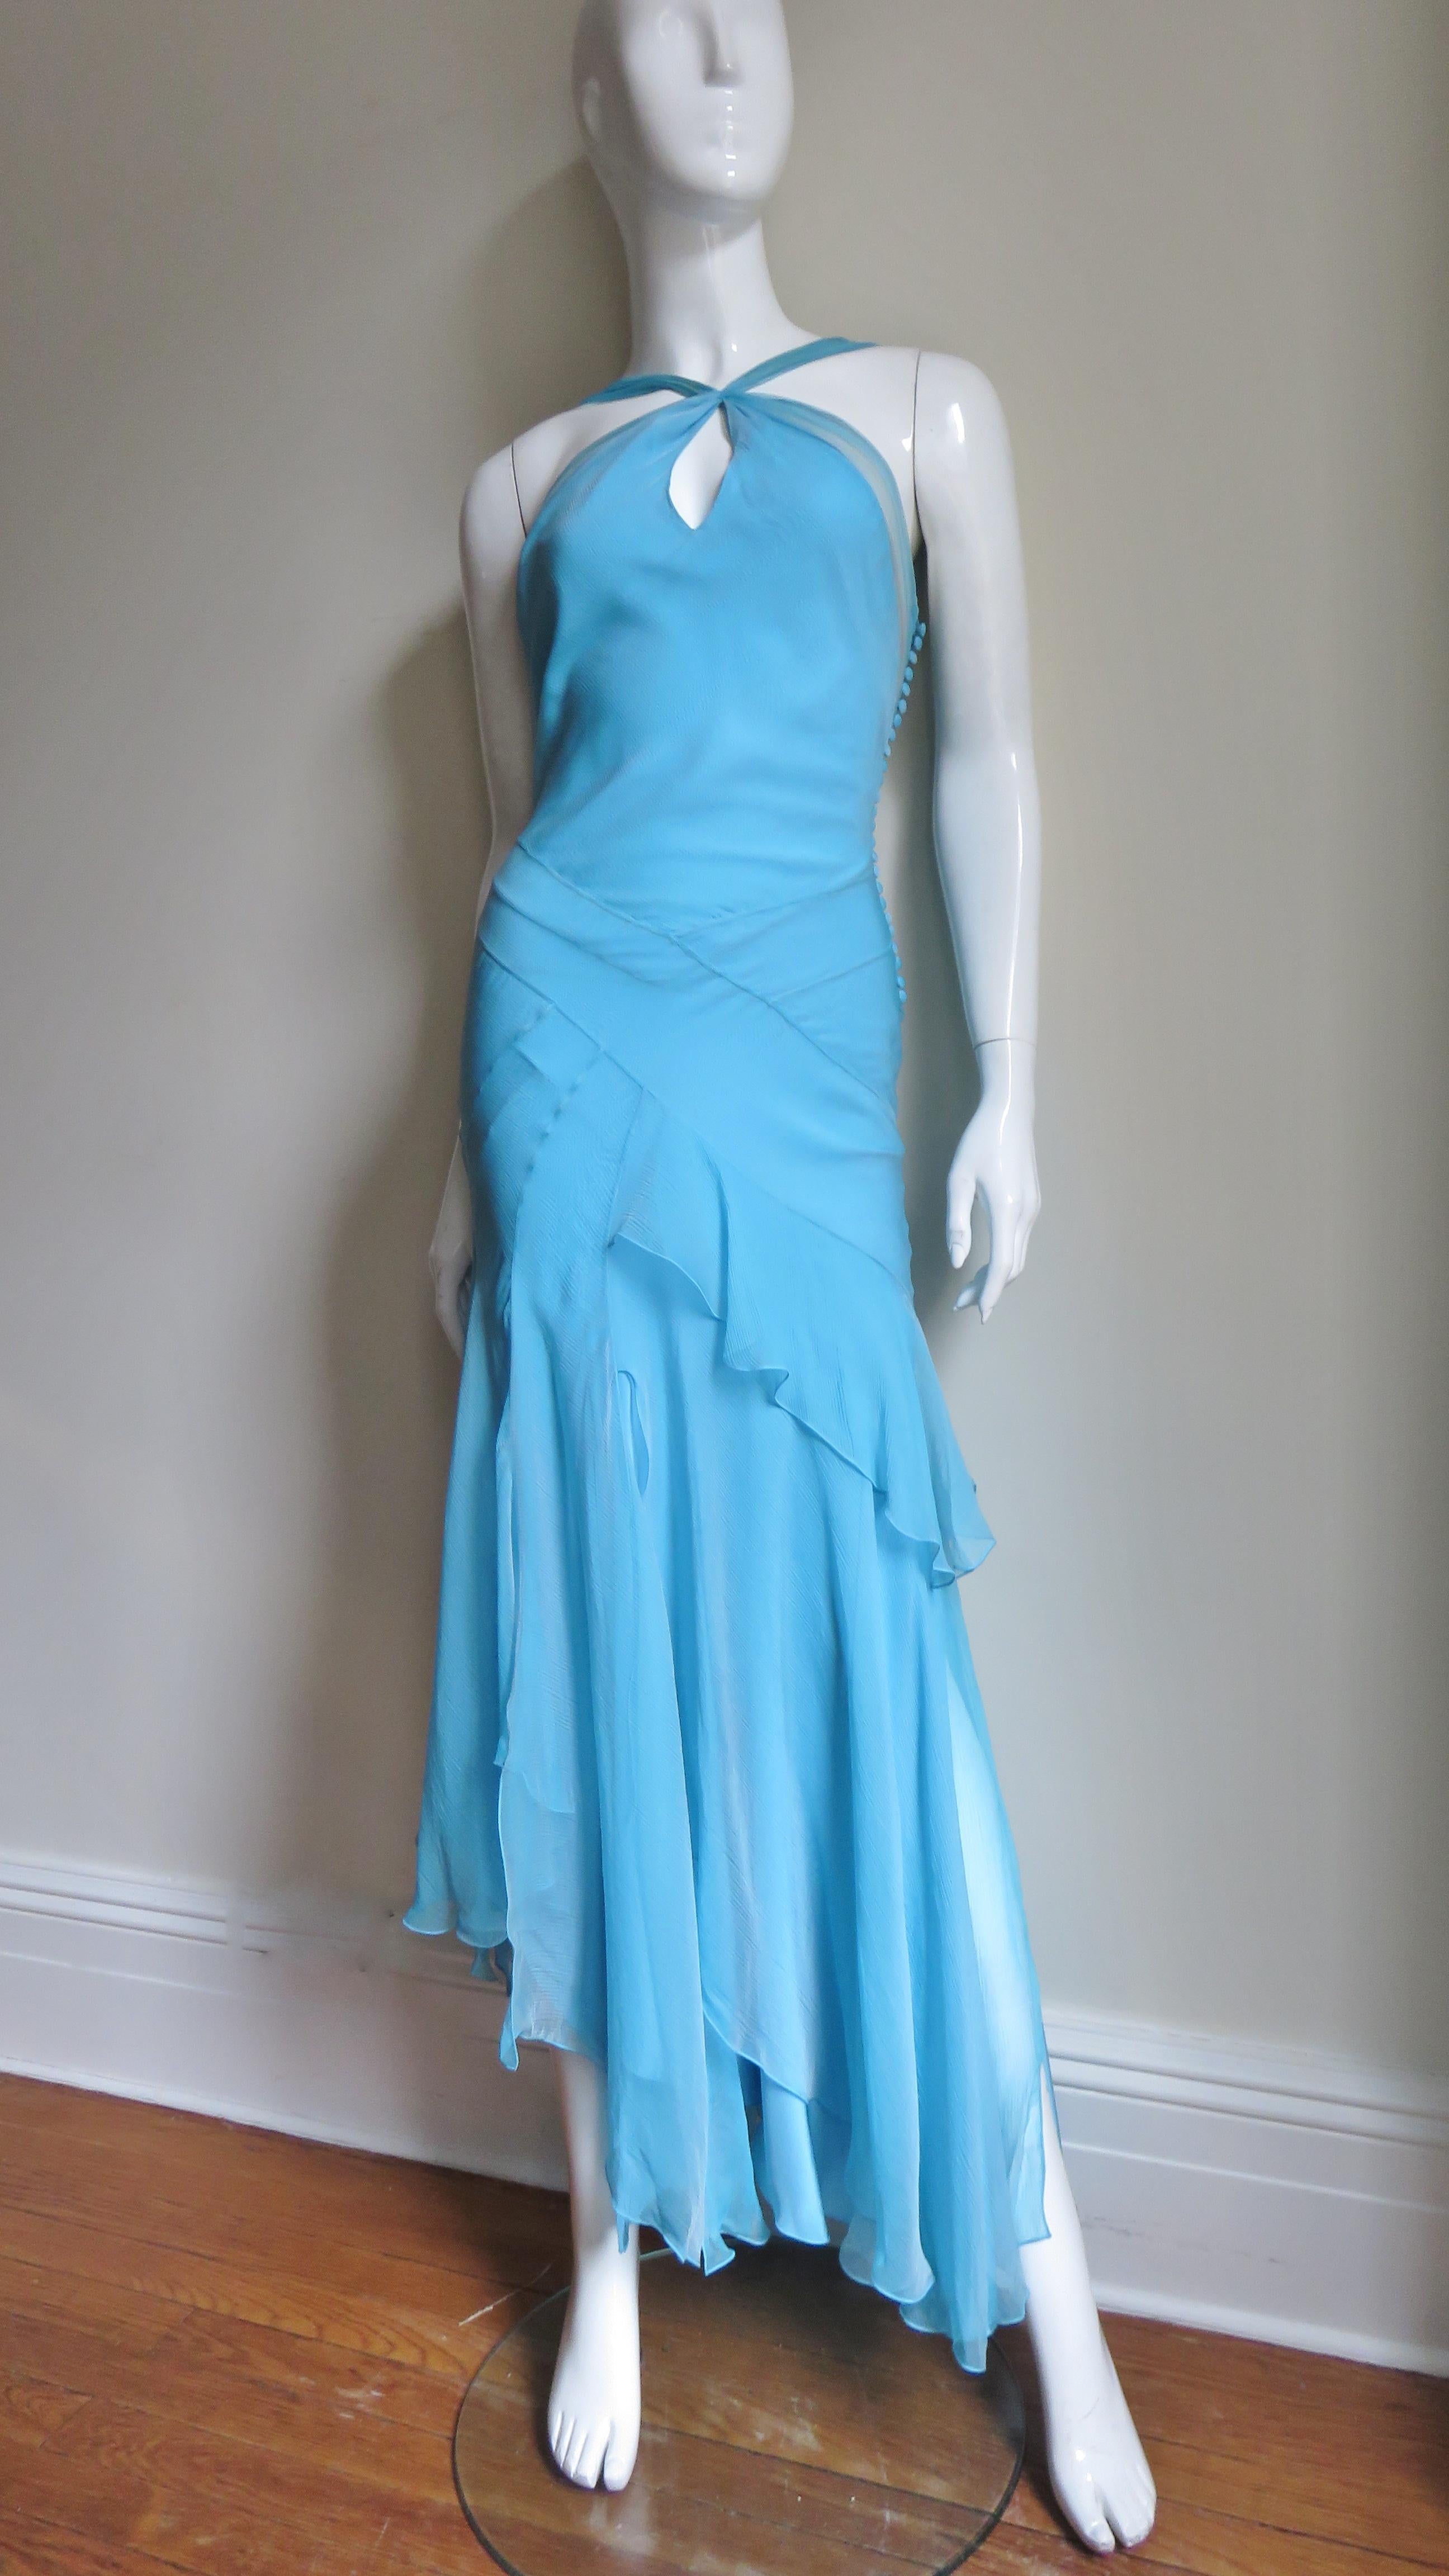 A gorgeous silk gown in a stunning shade of blue by John Galliano for Christian Dior.  It has crossing straps at the chest with a keyhole under it which attach to the mid back.  There is sheer panel along the bodice sides and back.  It has a